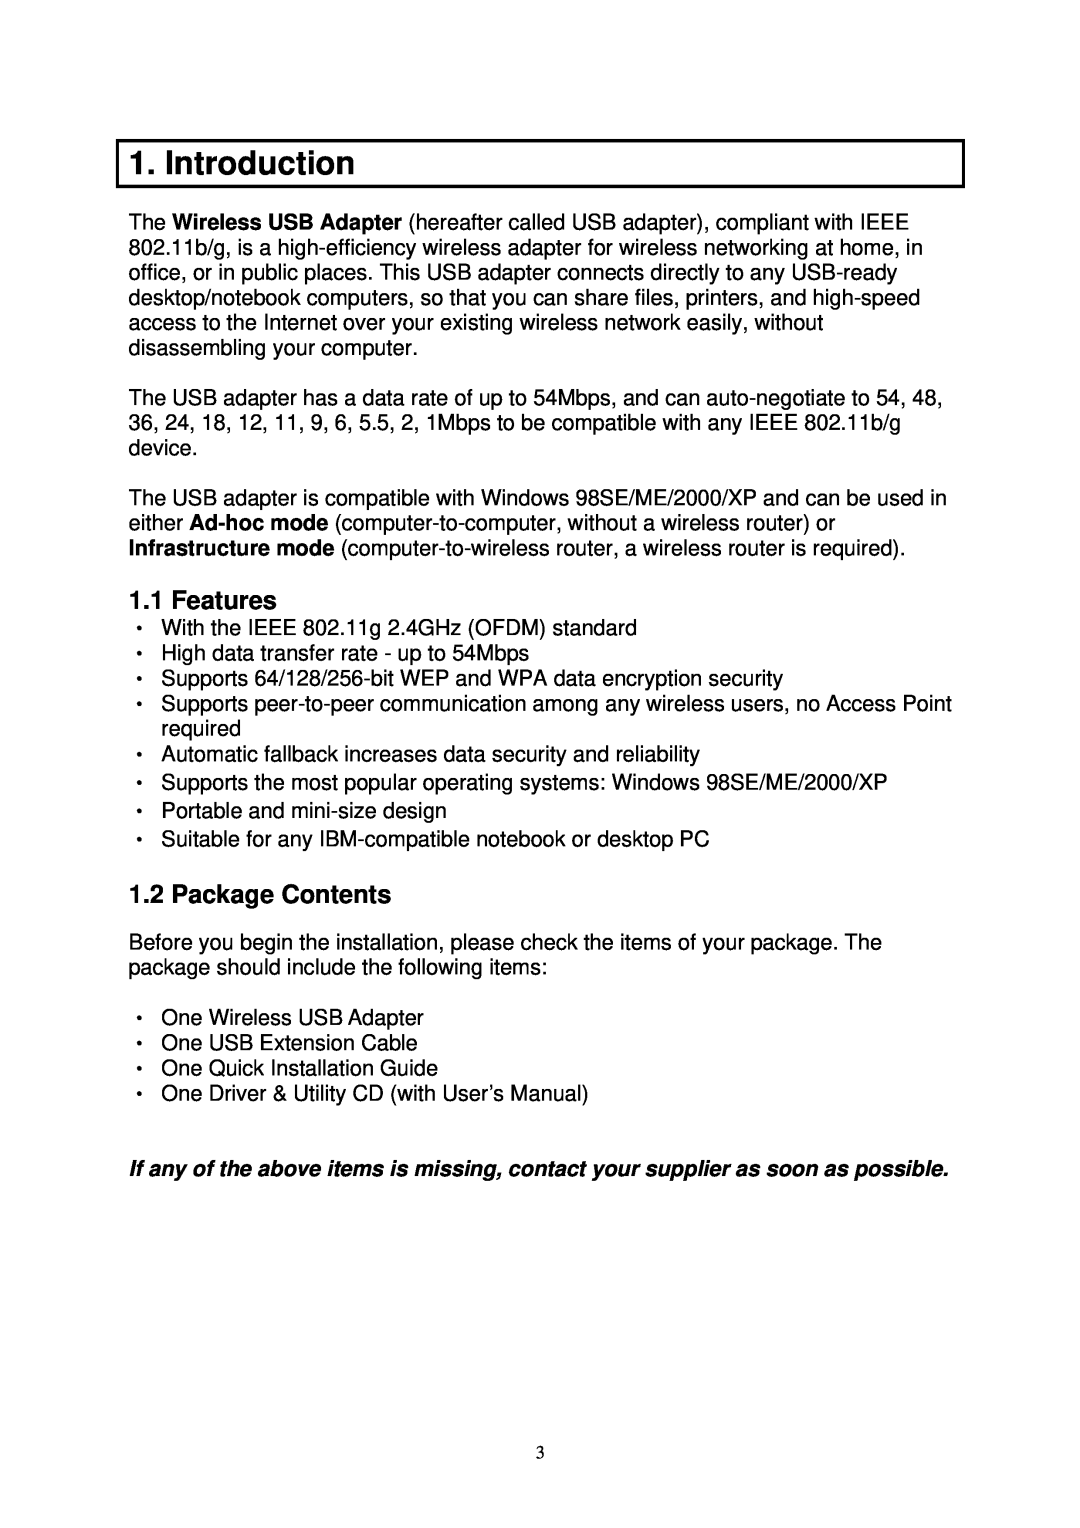 Airlink AWLL3025 user manual Introduction, Features, Package Contents 